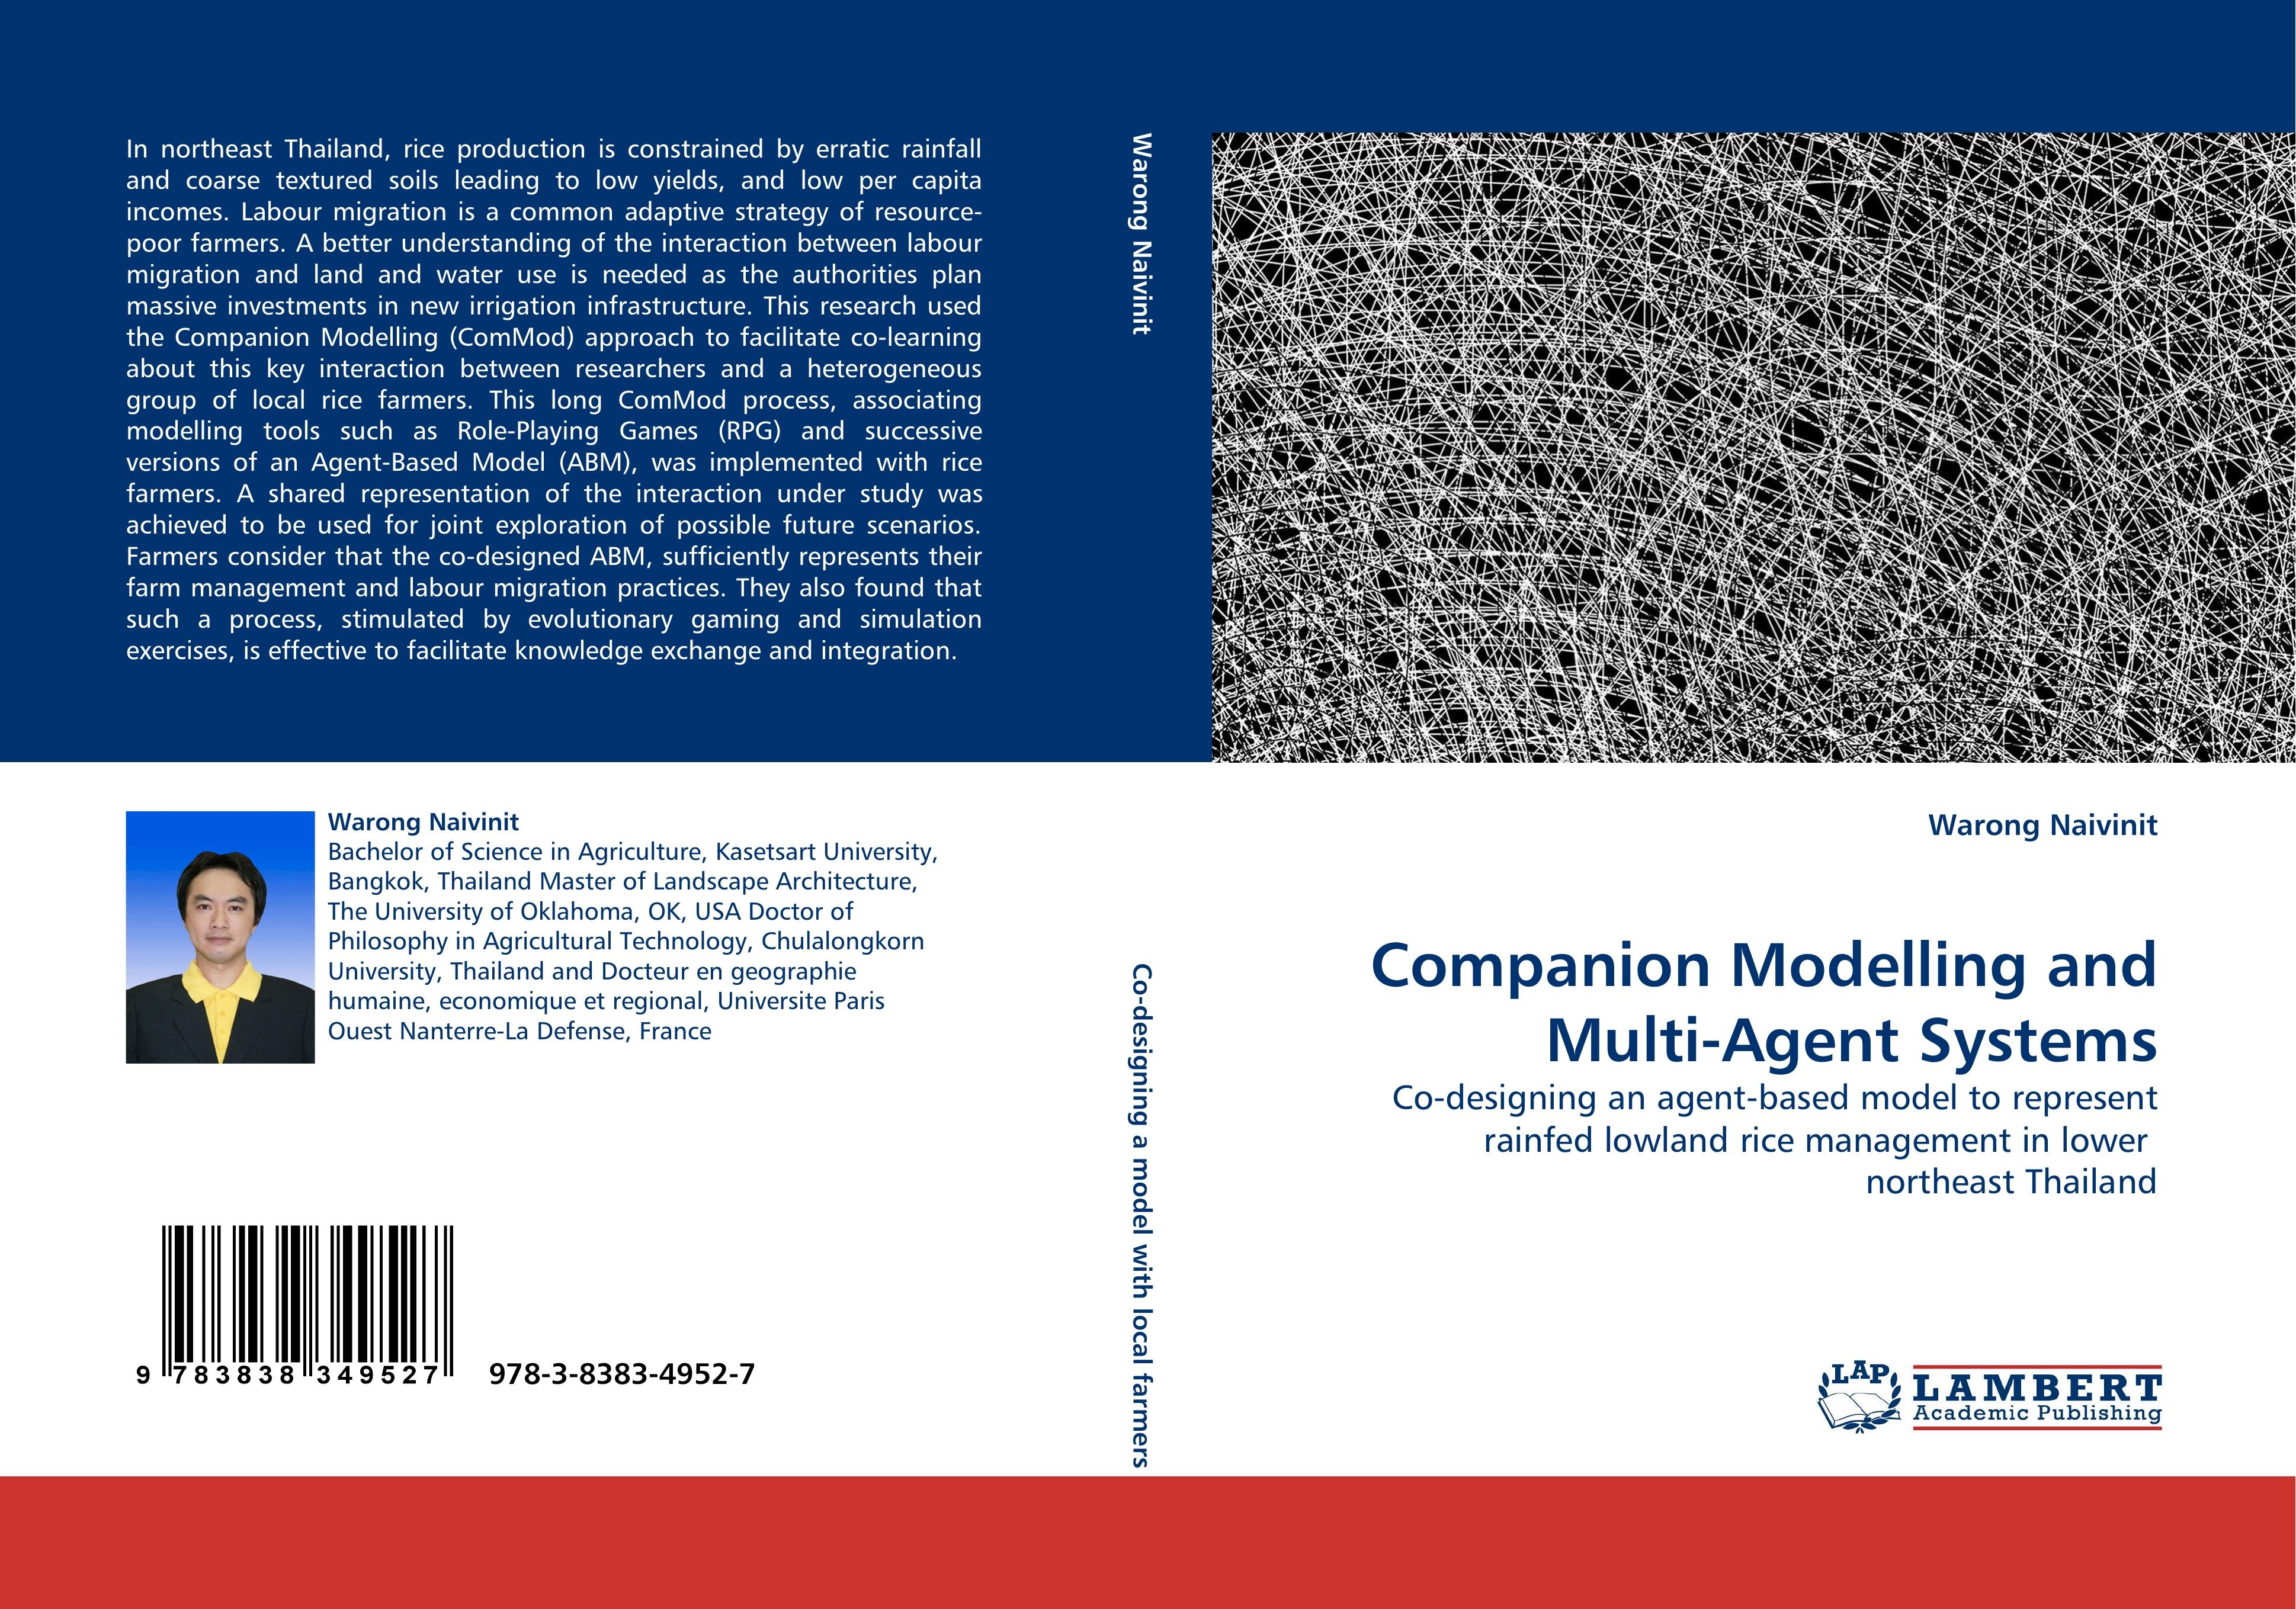 Companion Modelling and Multi-Agent Systems / Co-designing an agent-based model to represent rainfed lowland rice management in lower northeast Thailand / Warong Naivinit / Taschenbuch / Paperback - Naivinit, Warong